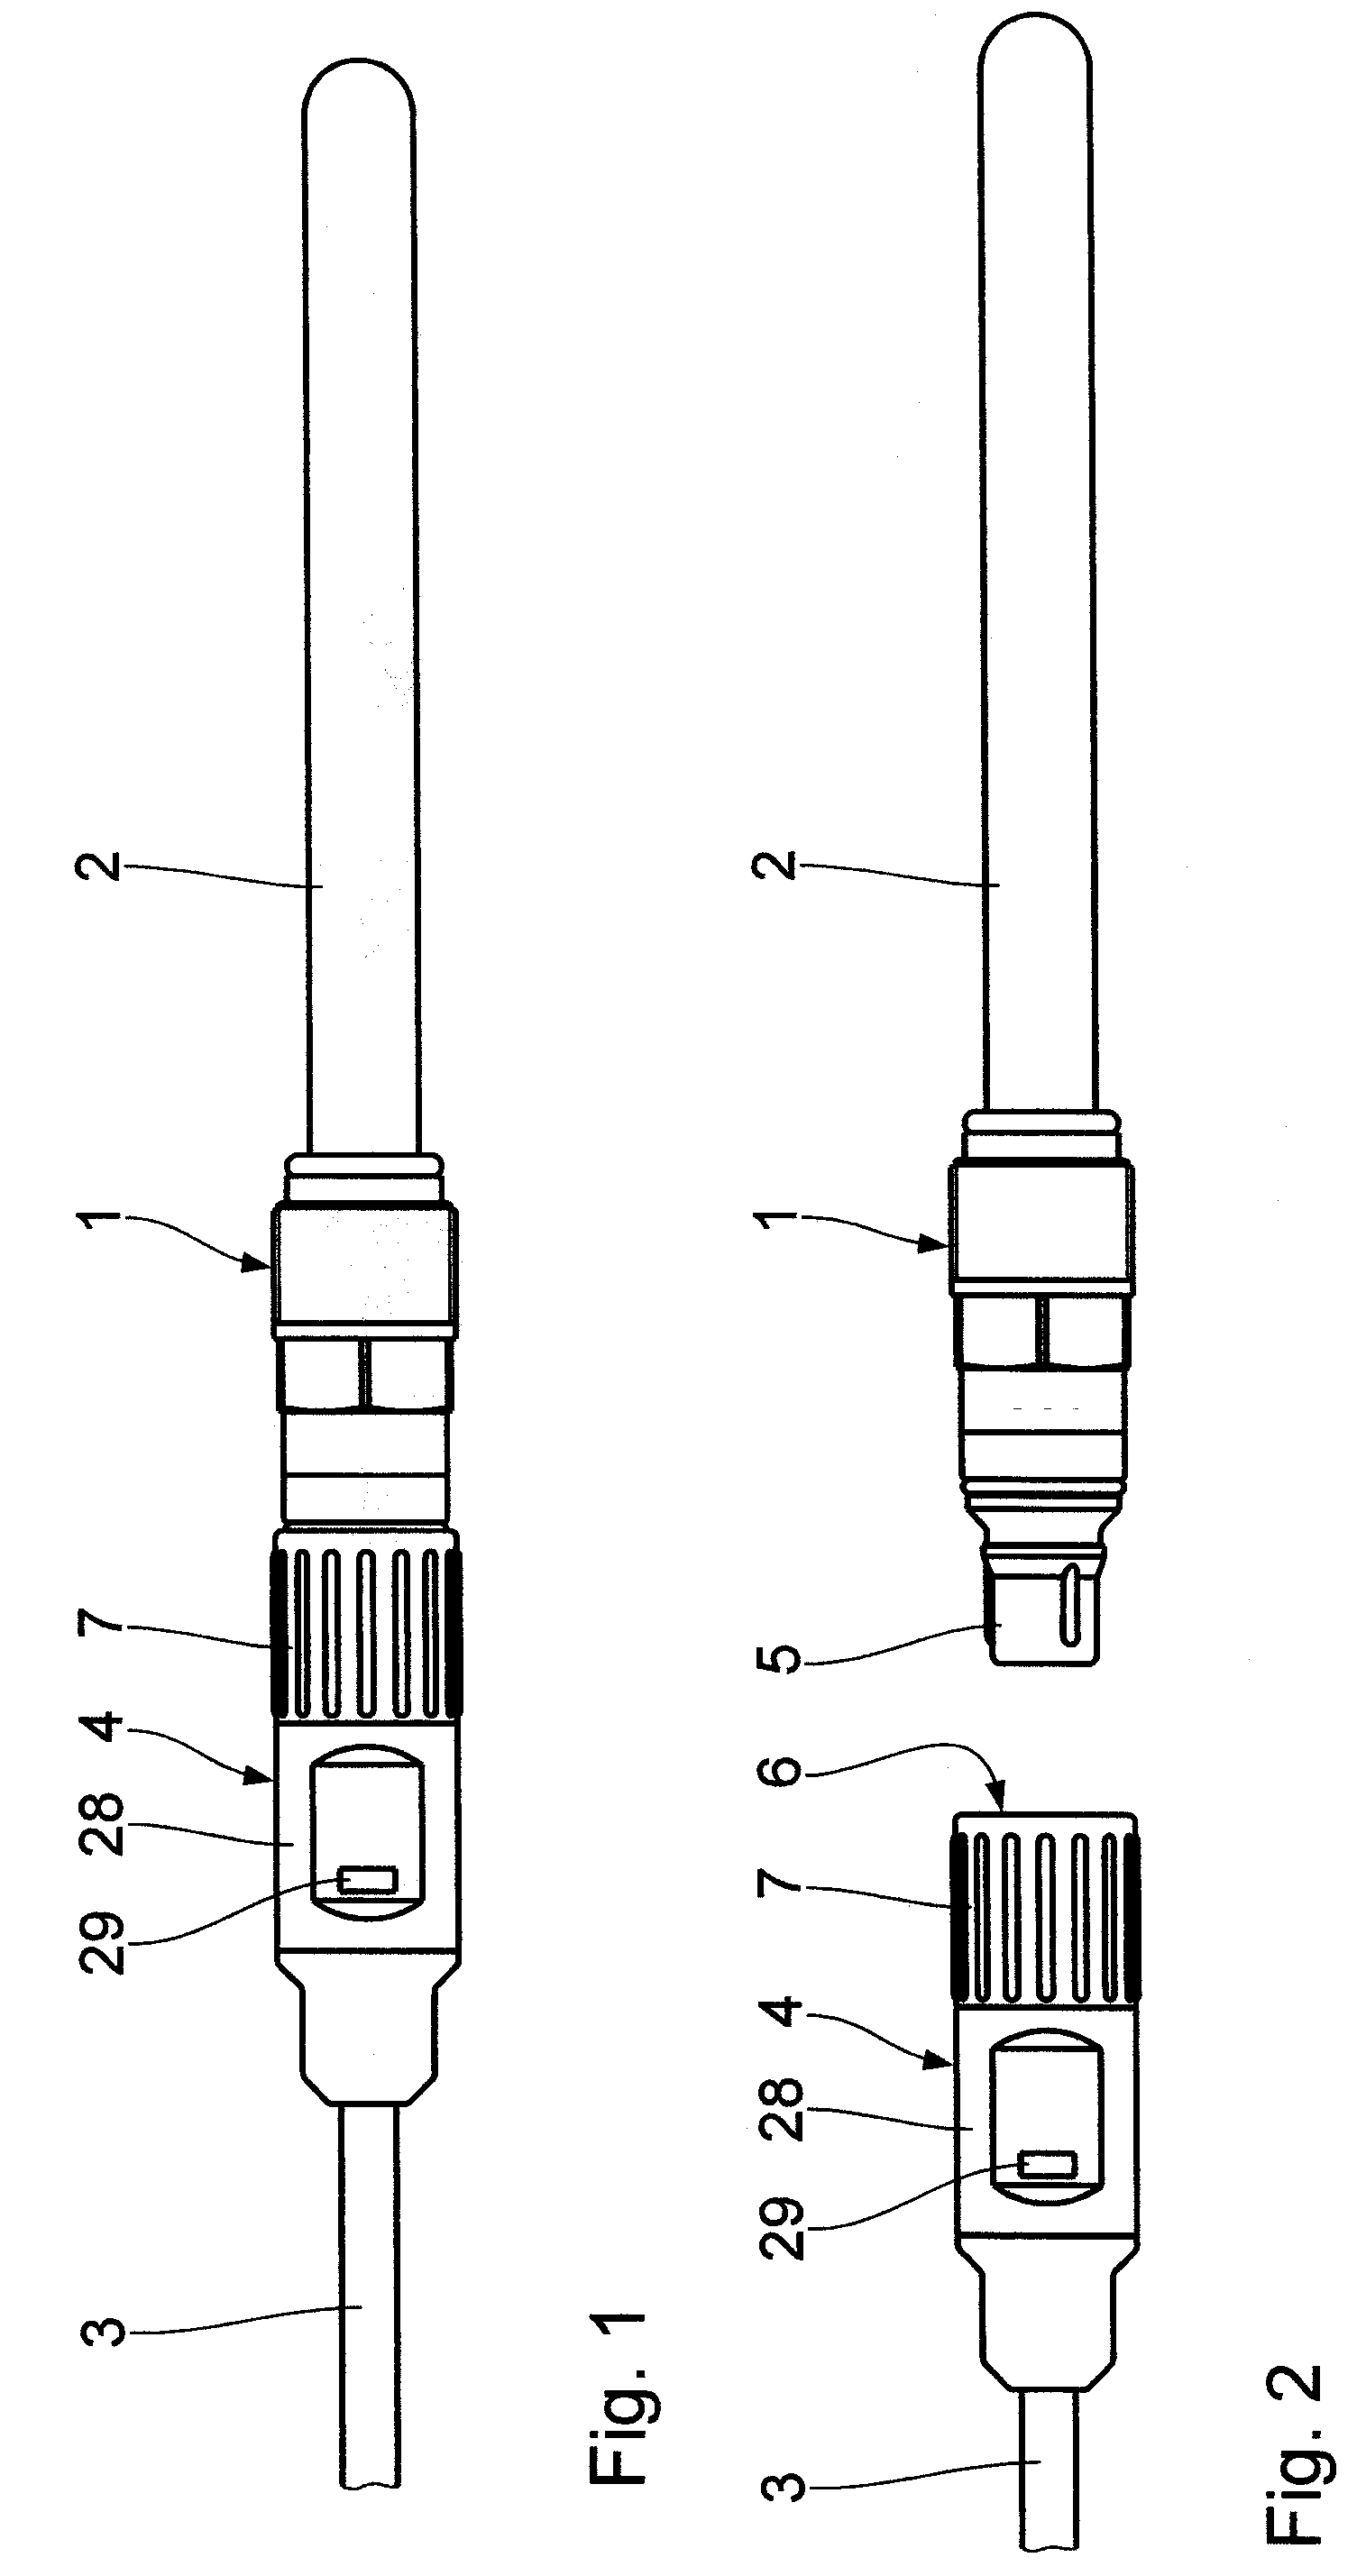 Connection system, in particular a plug-in connection system for the transmission of data and power supply signals